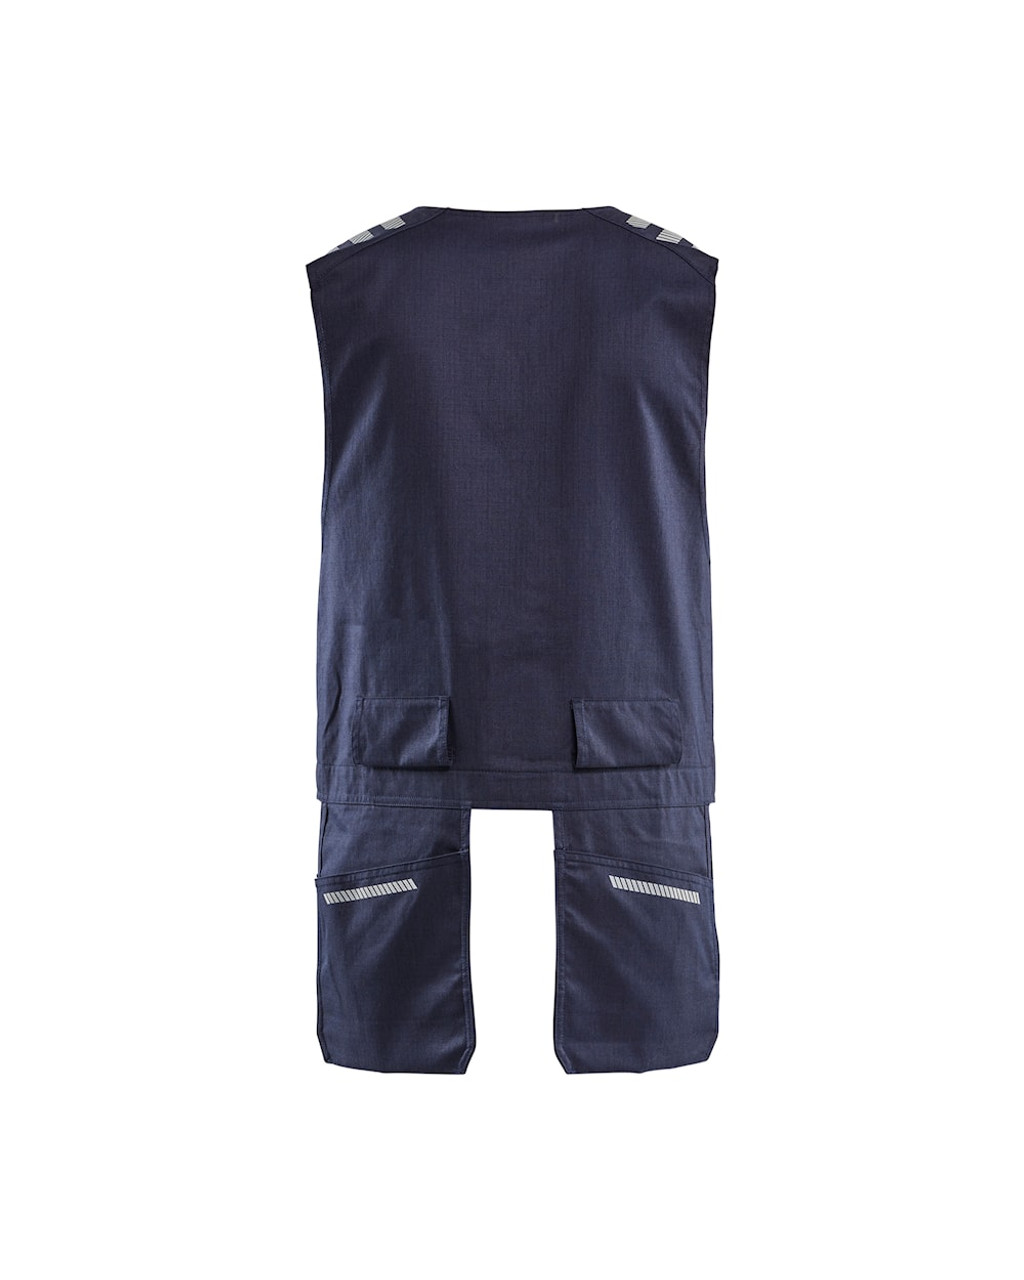 BLAKLADER Durable Poly/Cotton Blend Navy Blue Tool Vest for Welders that have Holster Pockets  available in Australia and New Zealand